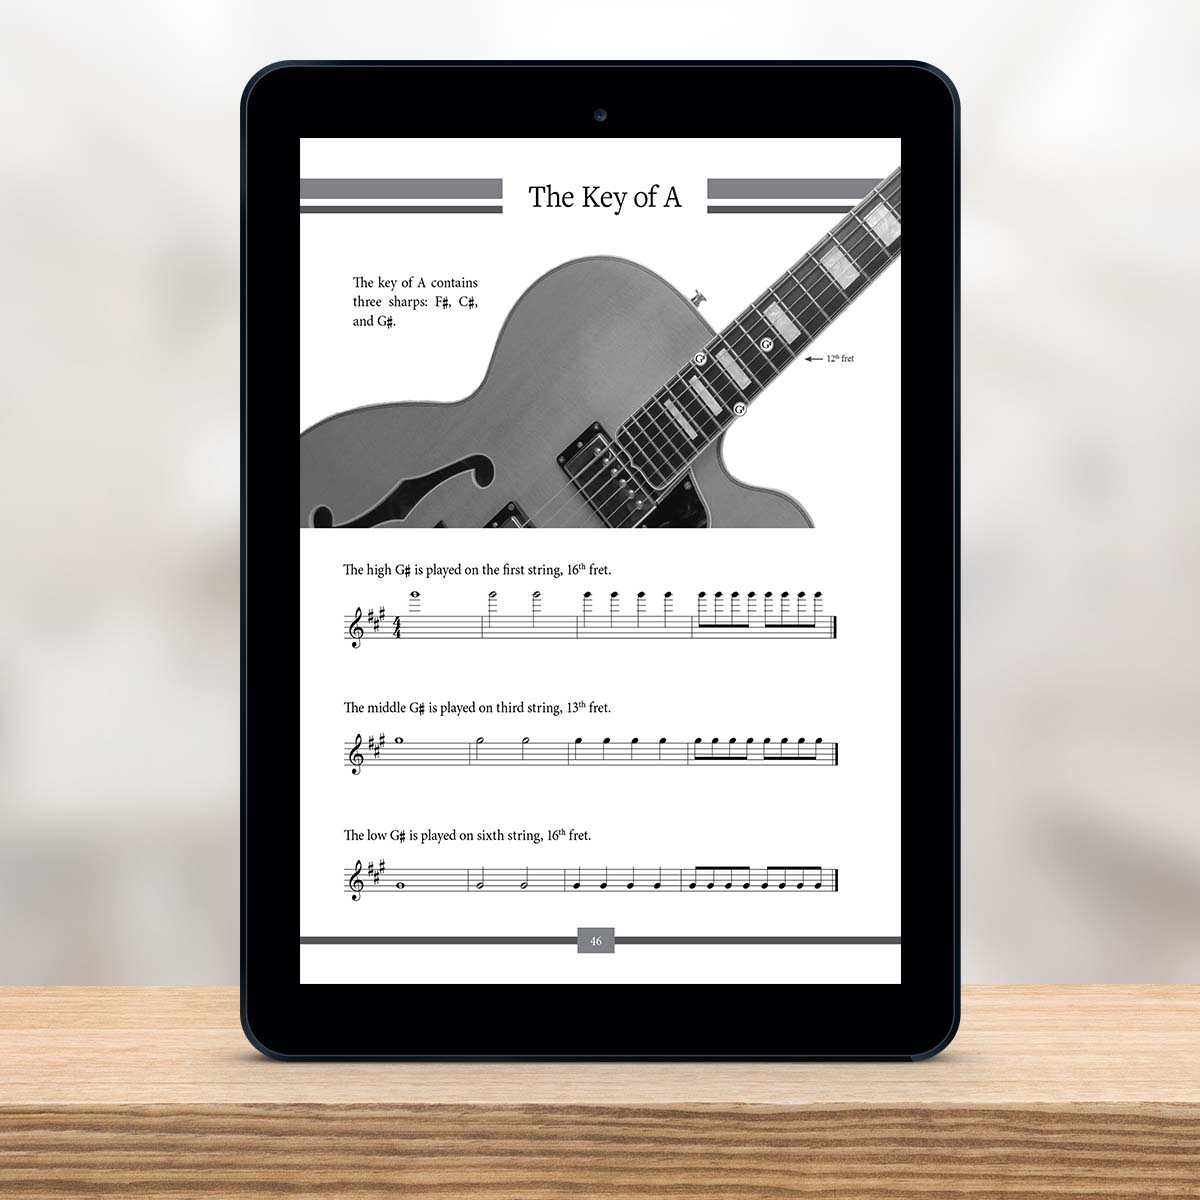 Digital Tablet showing a page from The Missing Method for Guitar Note Reading Series Book 5 by Christian Triola